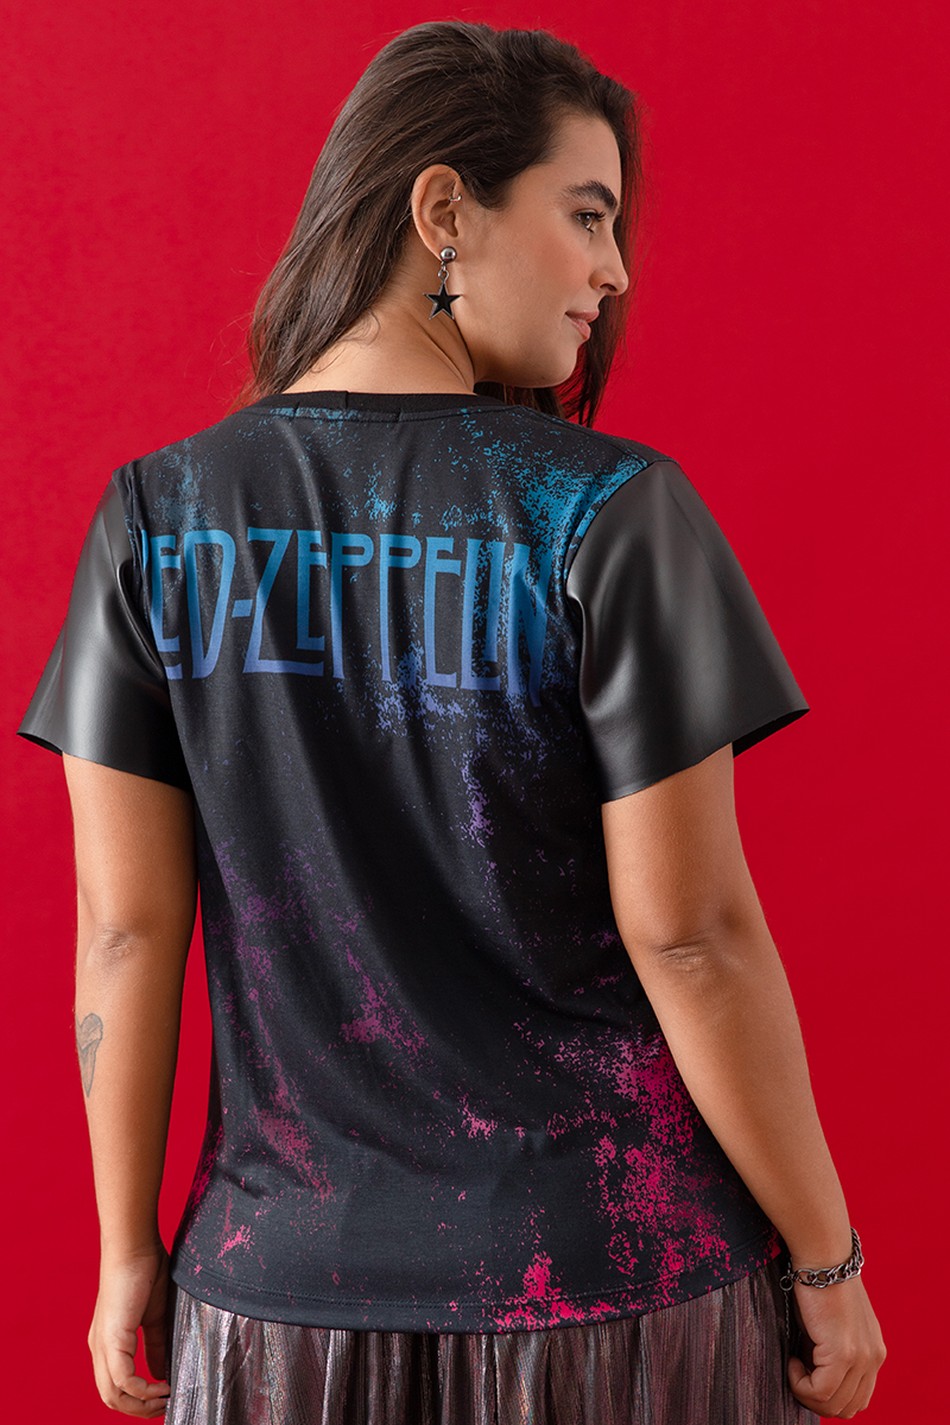 BLUSA SUPERSONICA LED ZEPPELIN